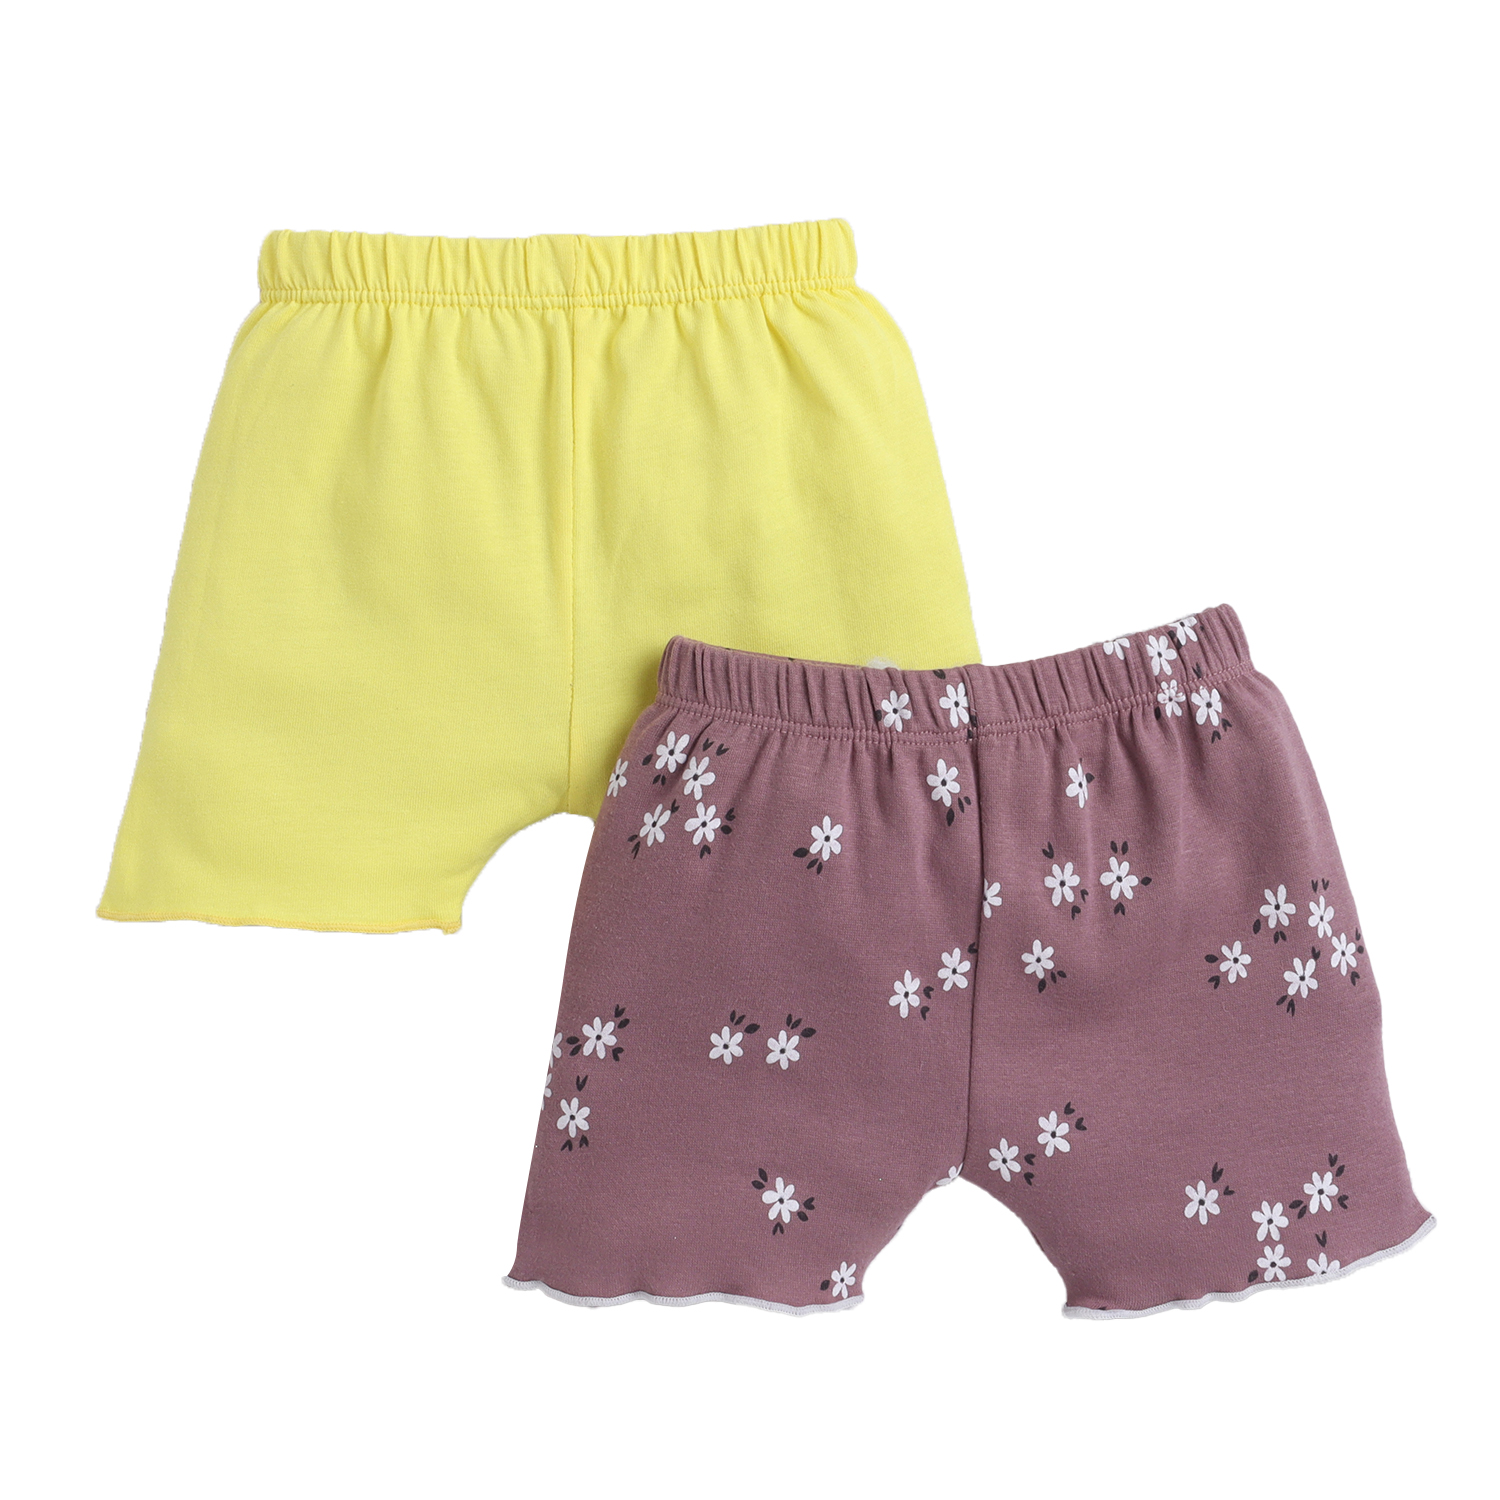 Aliexpress.com : Buy New Arrival Children Summer Little Flower Half Pants  for Girls Casual Capris from Reliable Pa… | Kids fashion clothes, Girls  pants, Casual girl